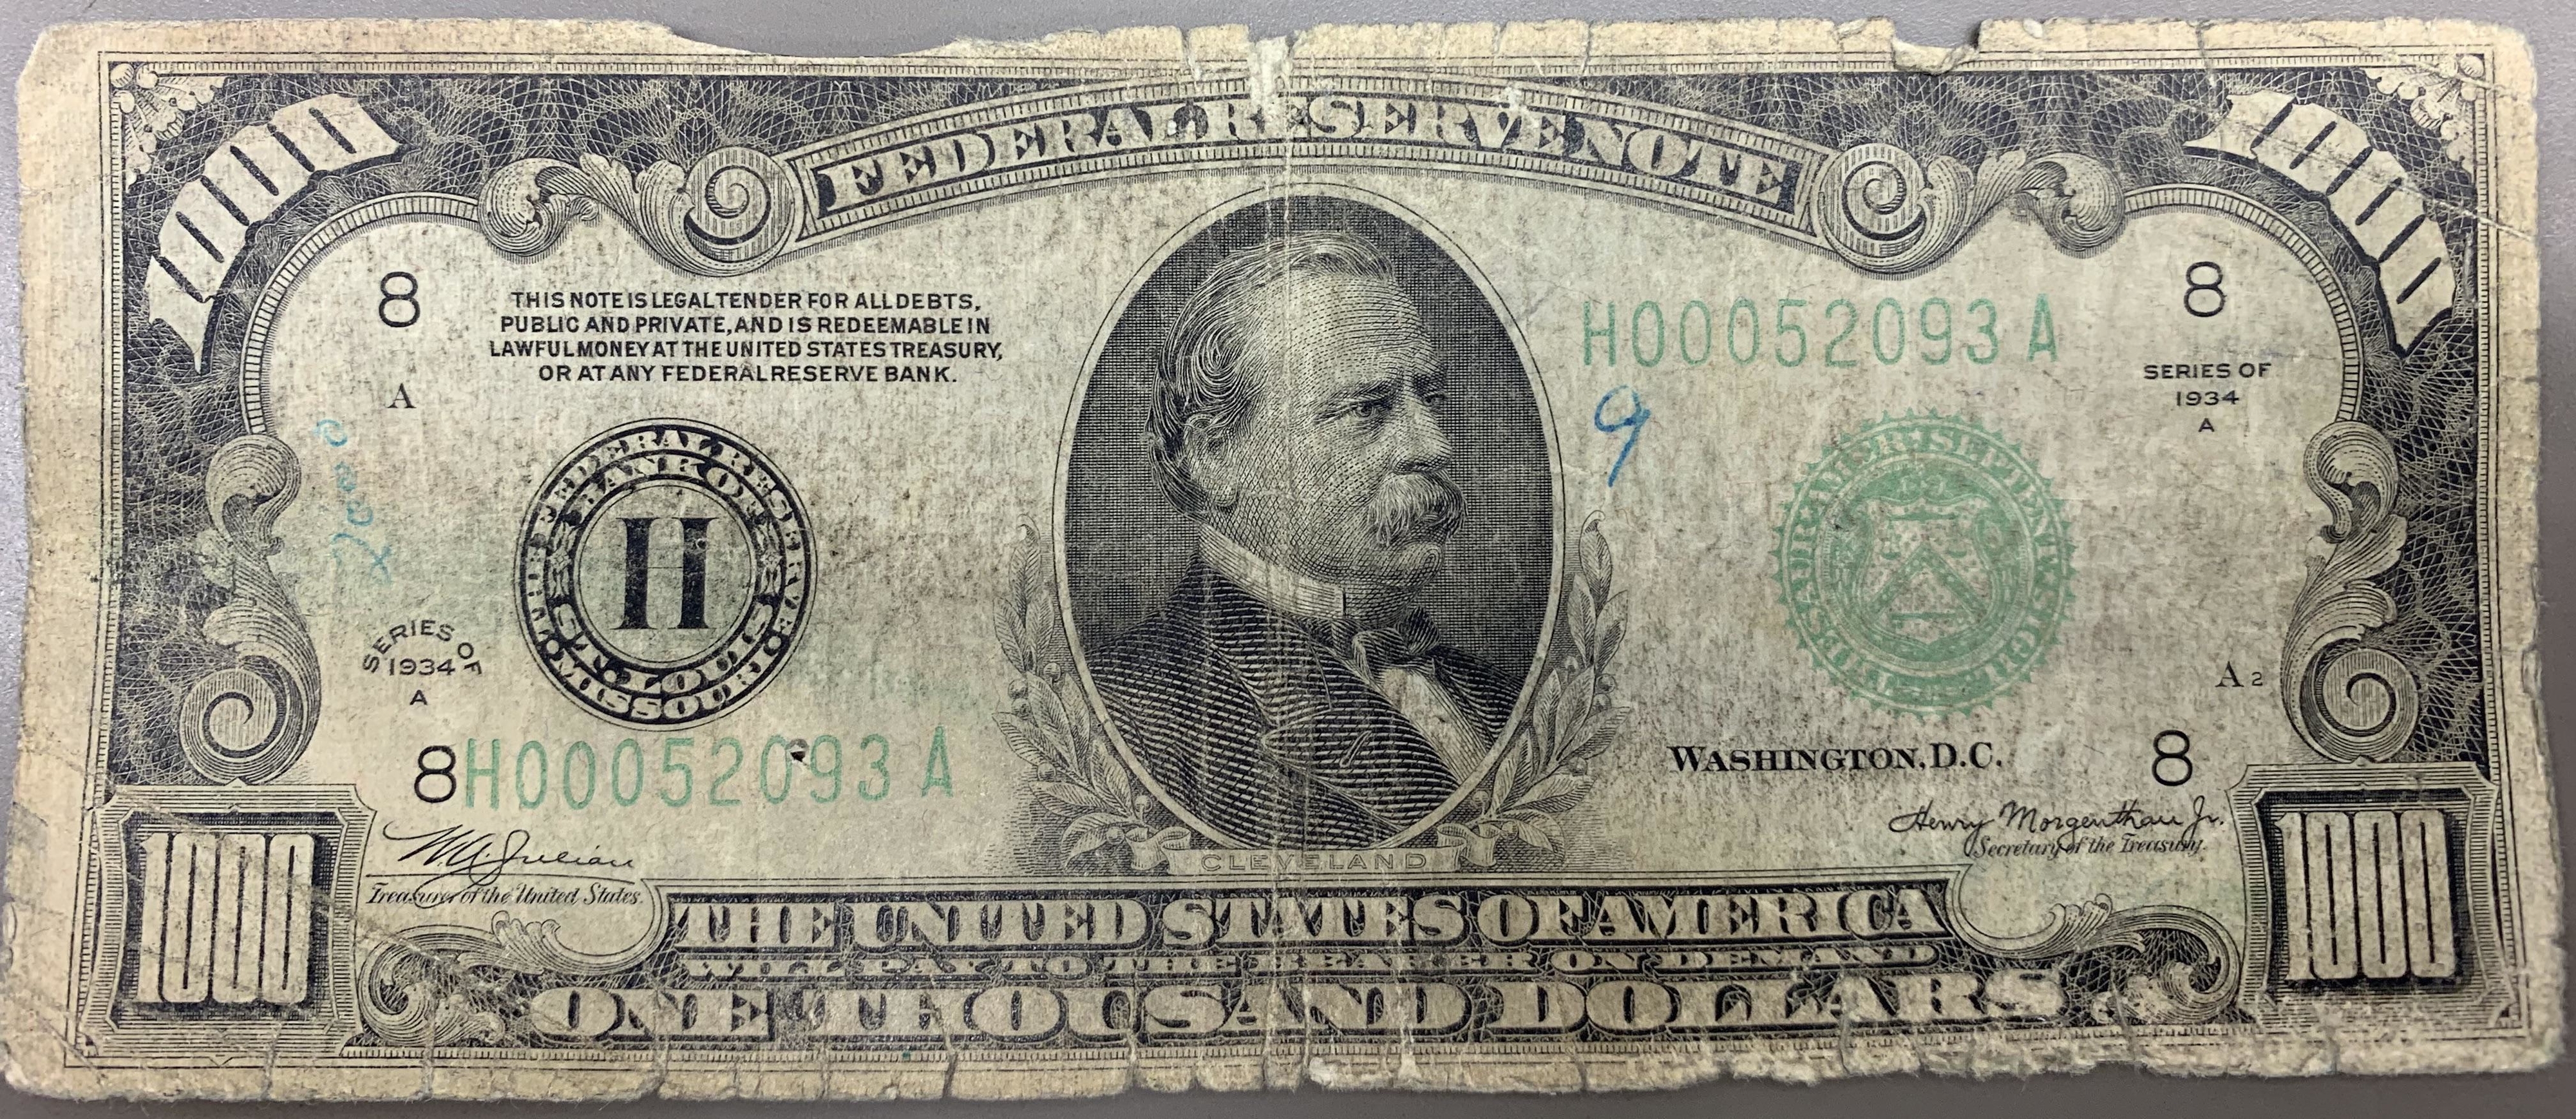 A $1,000 bill with the usual elements, plus Grover Cleveland in the middle